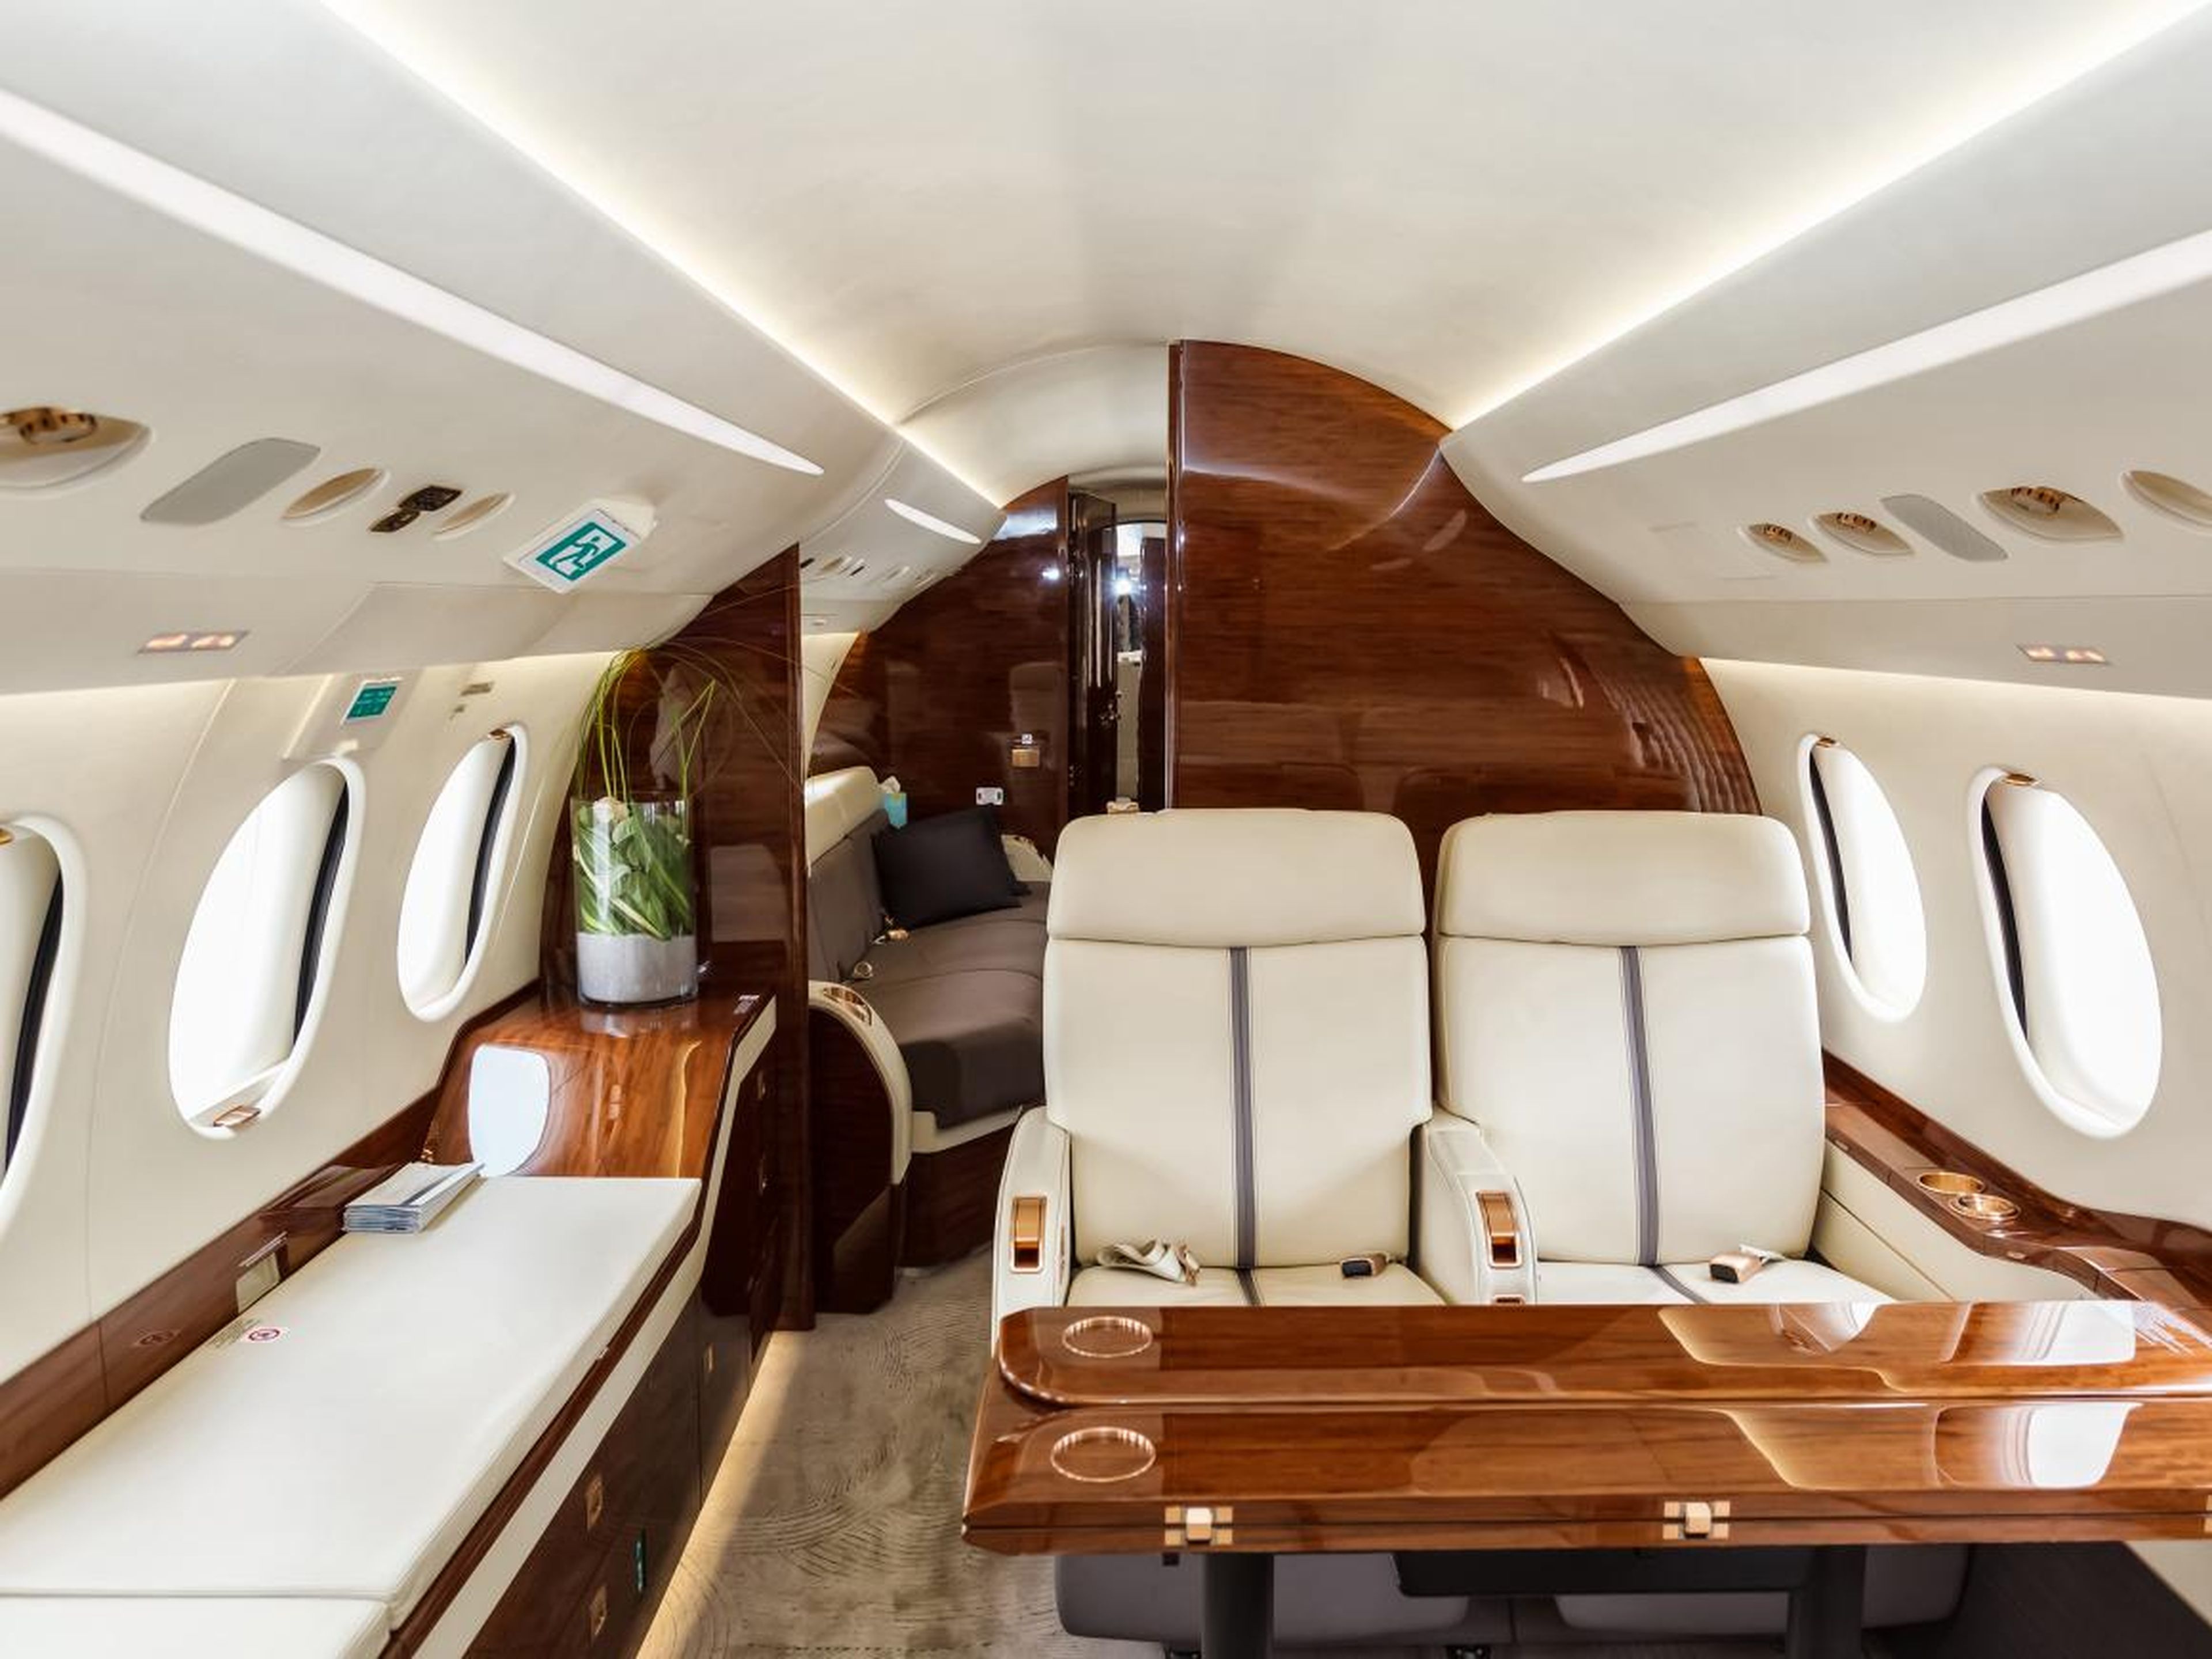 Another obvious advantage of flying on a private plane is the privacy. Whether you own your own jet or you're chartering a flight, you won't be surrounded by scores of other passengers as you would be on a typical commercial